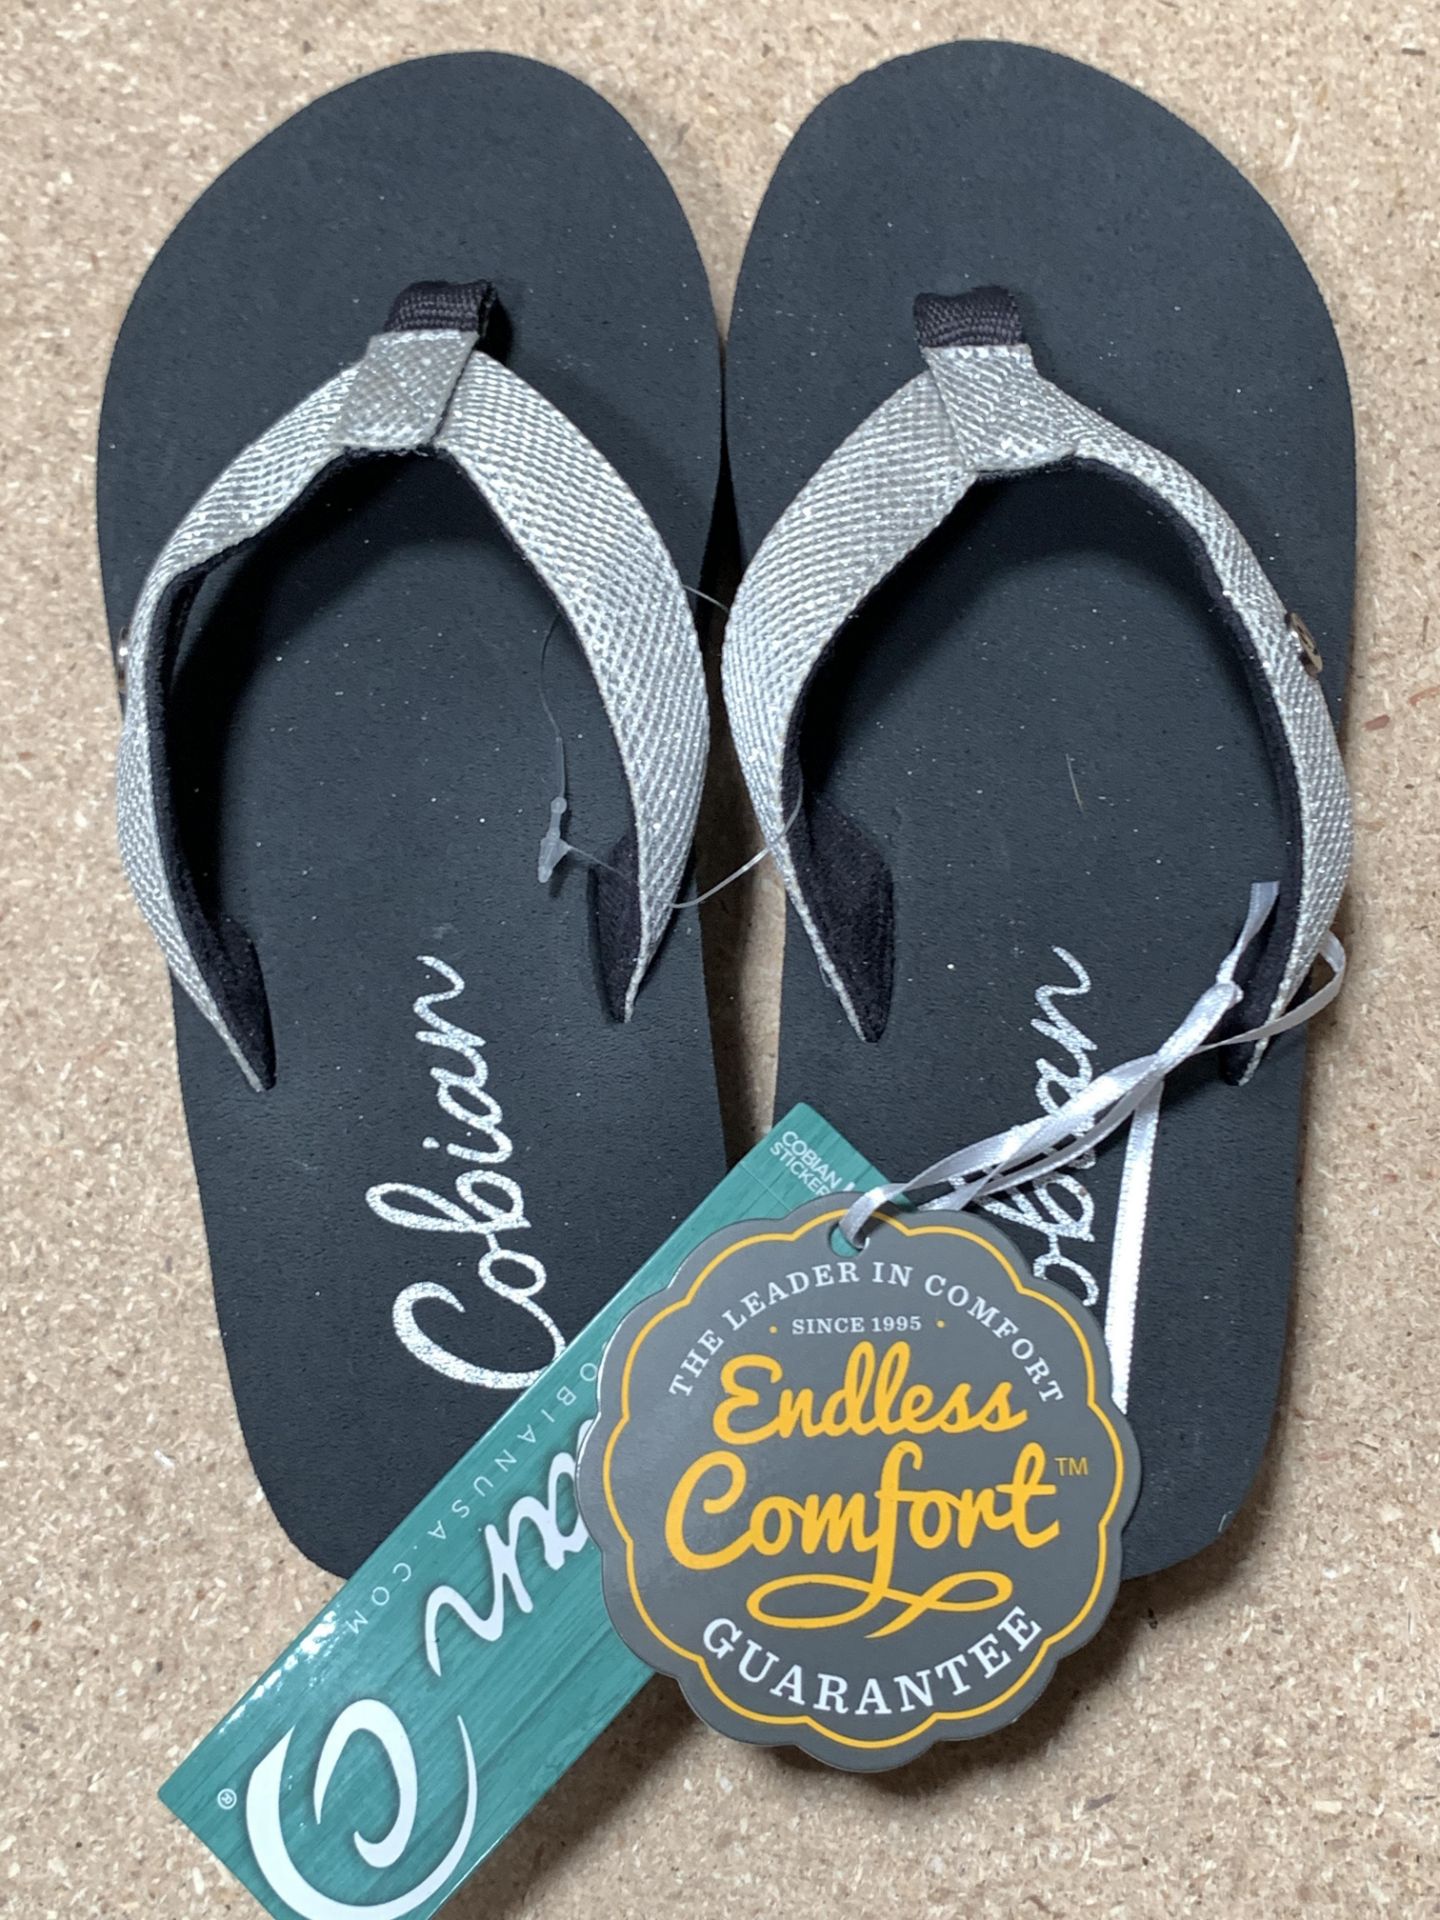 7 Pairs Cobian Flip Flop Sandals, Cancun Bounce, New w. Tags, Various Sizes (Retail $266) - Image 3 of 4